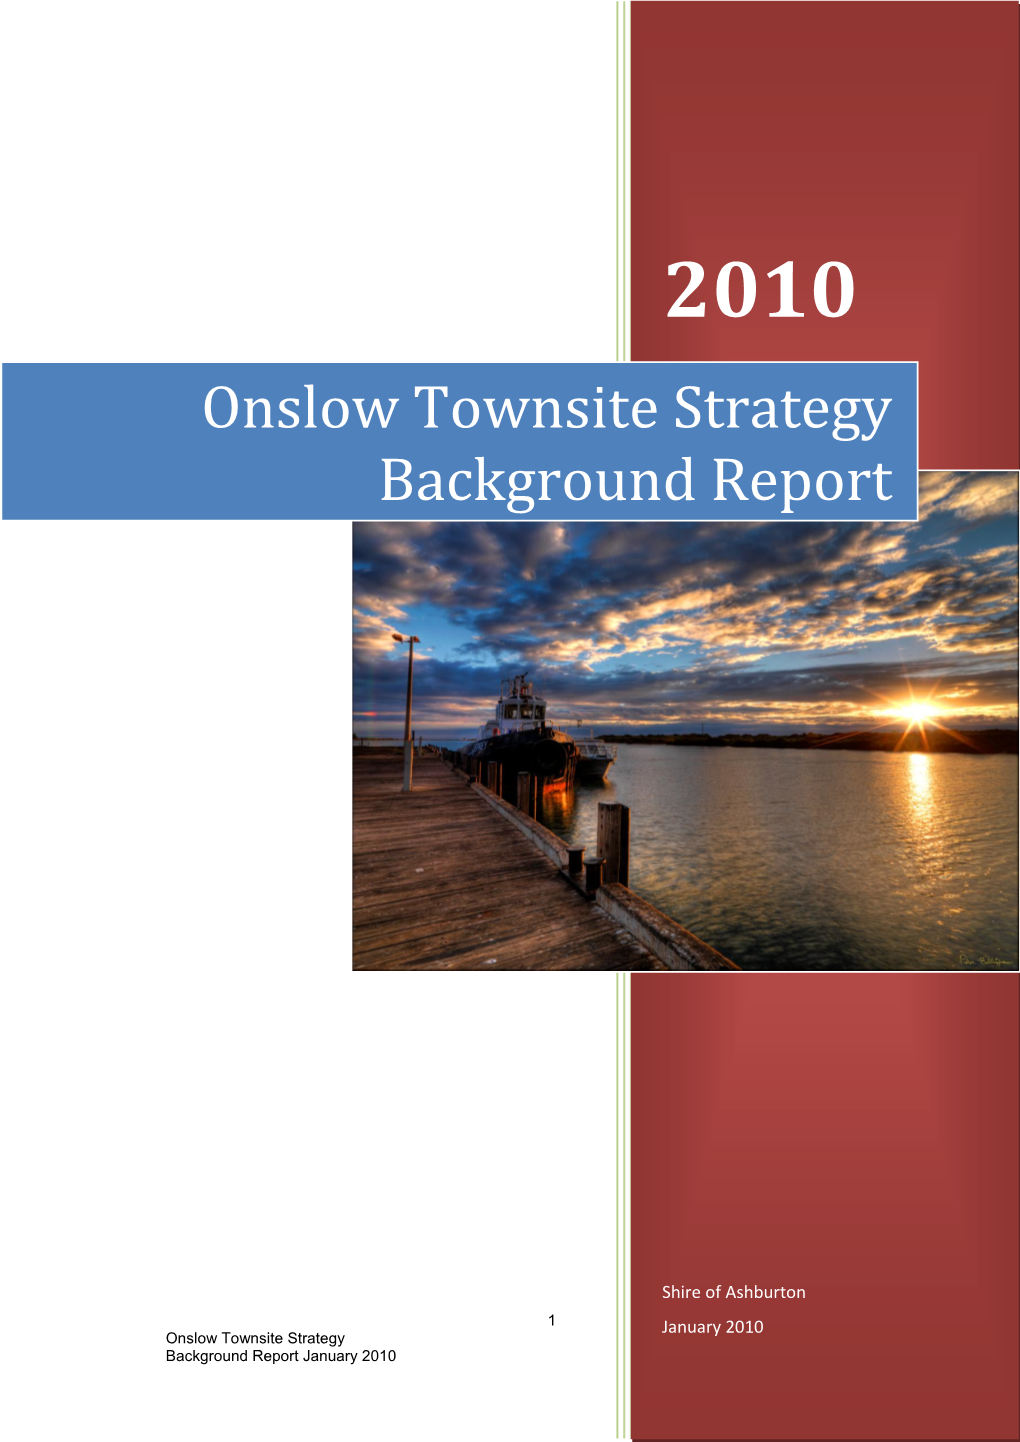 Onslow Townsite Strategy Background Report